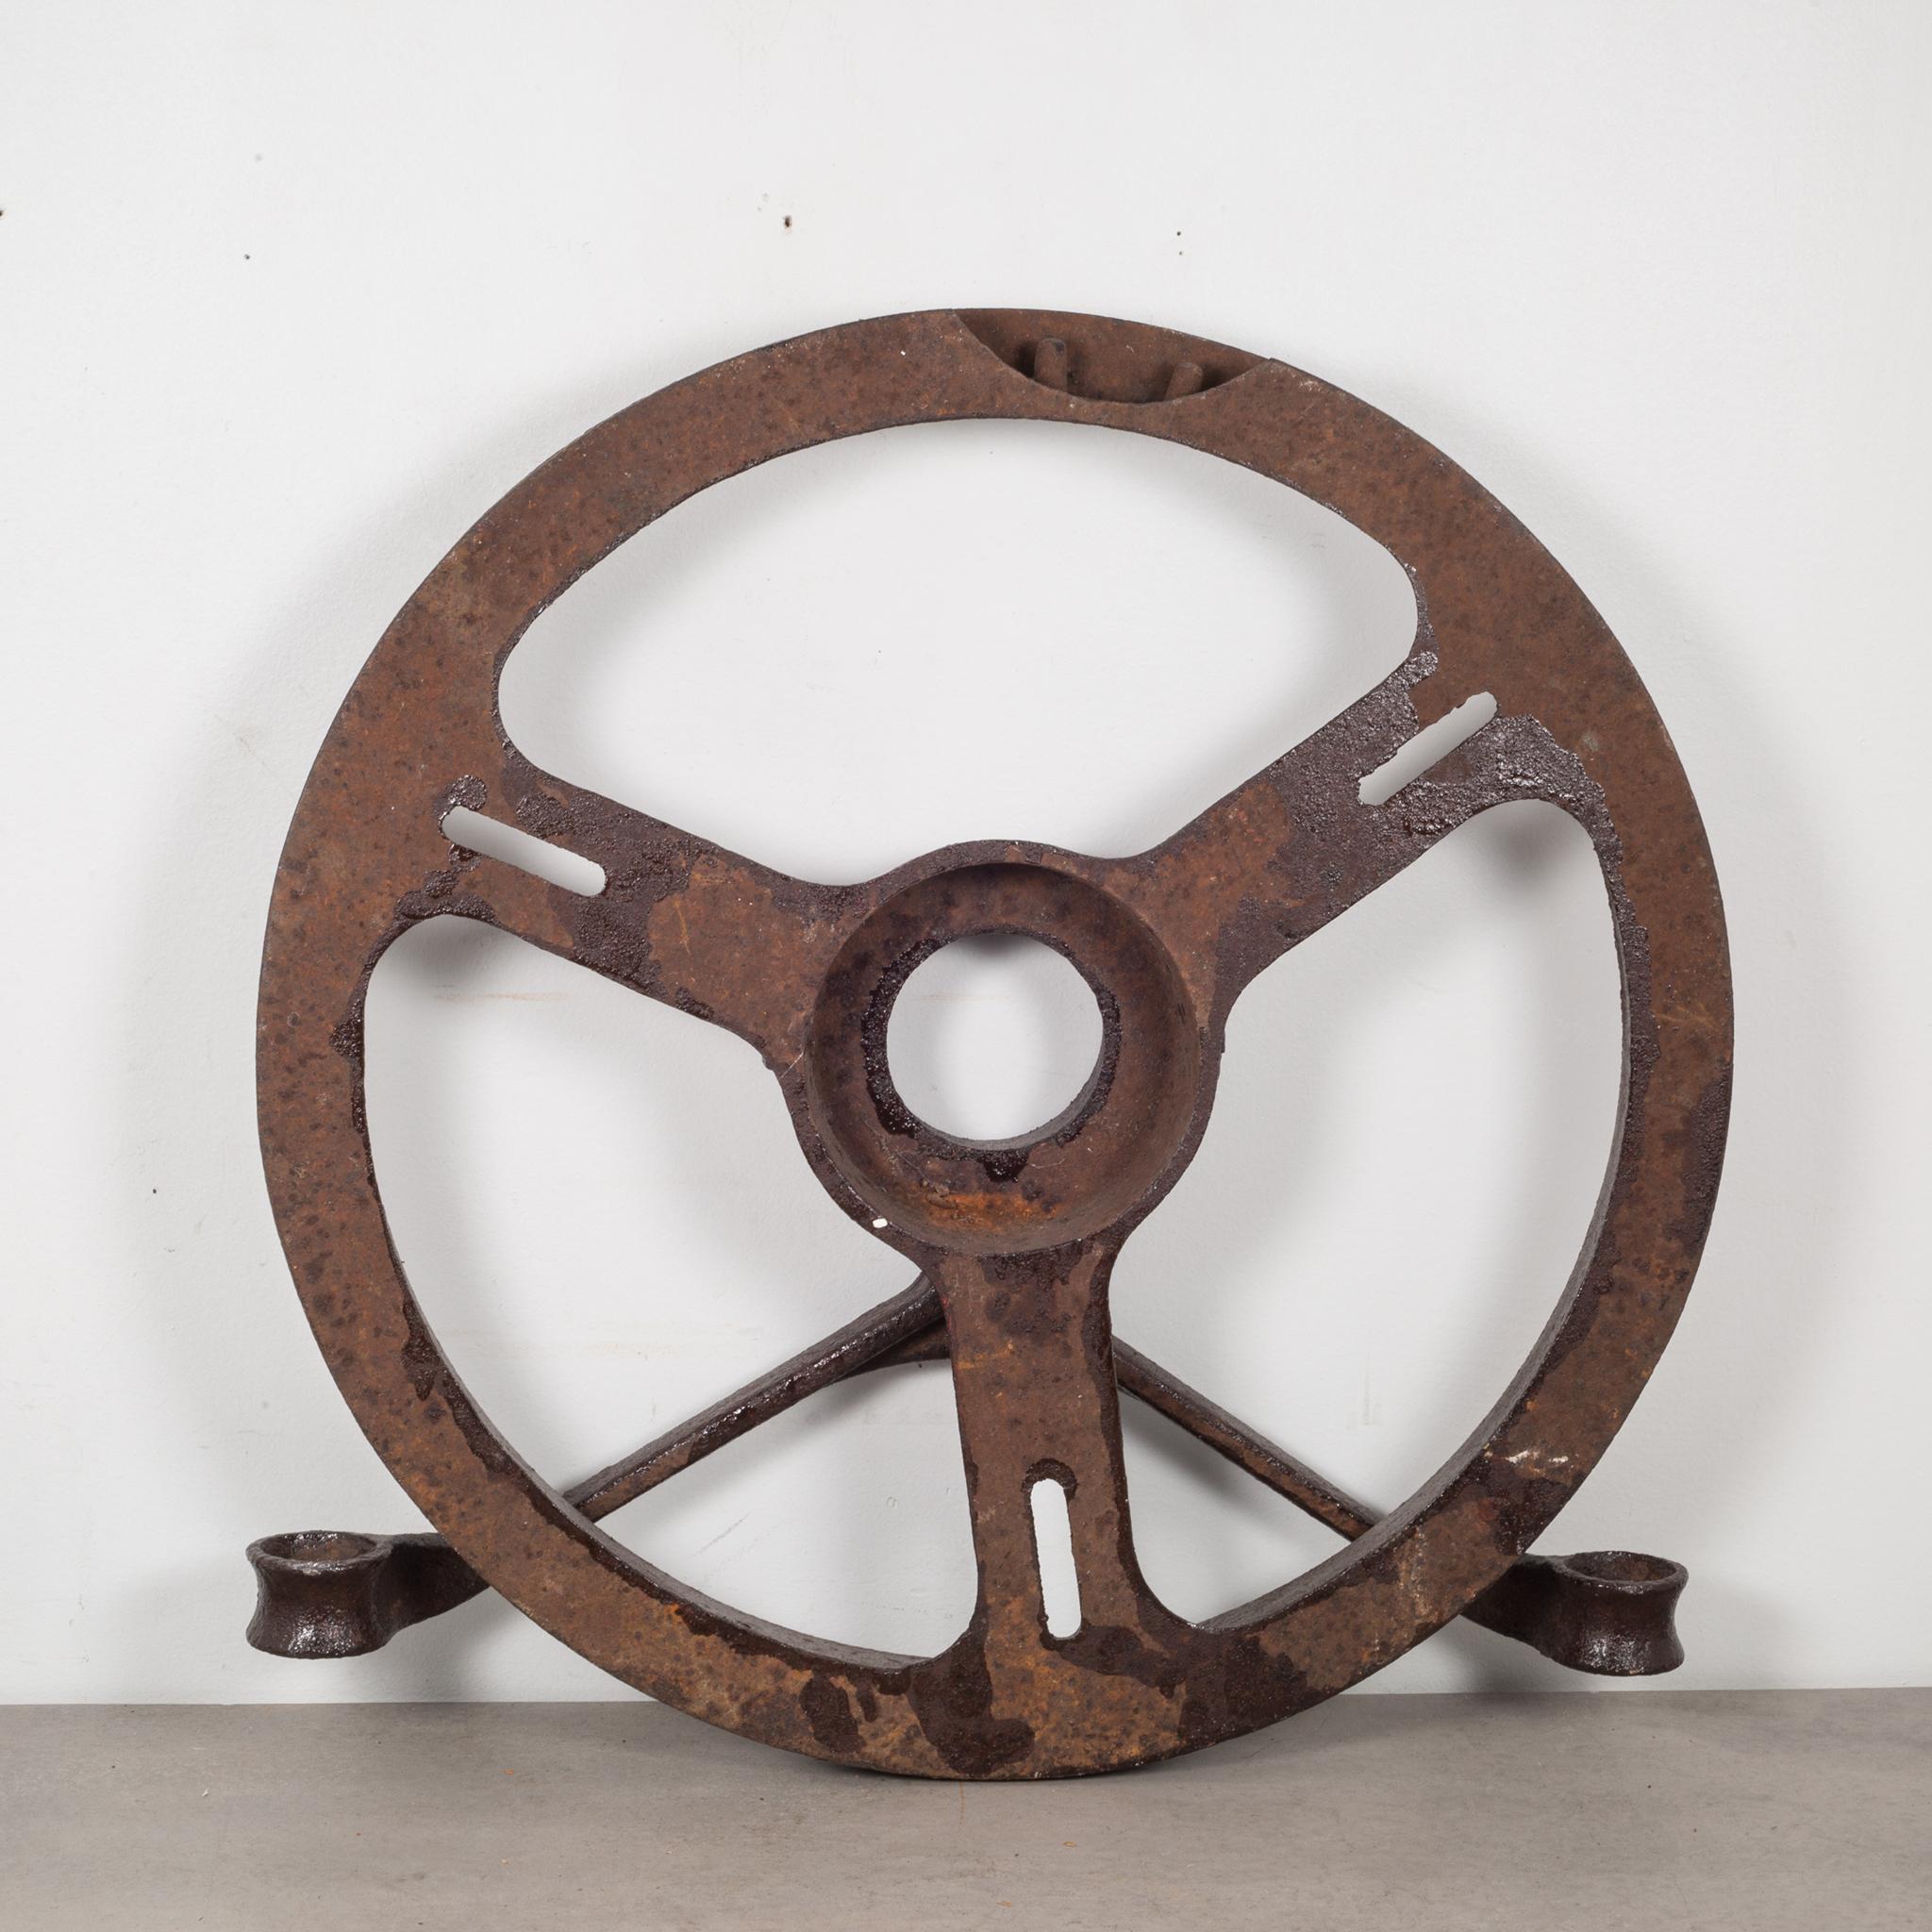 About

A large steel sprocket with a swinging arm in front. Embossed on the front 